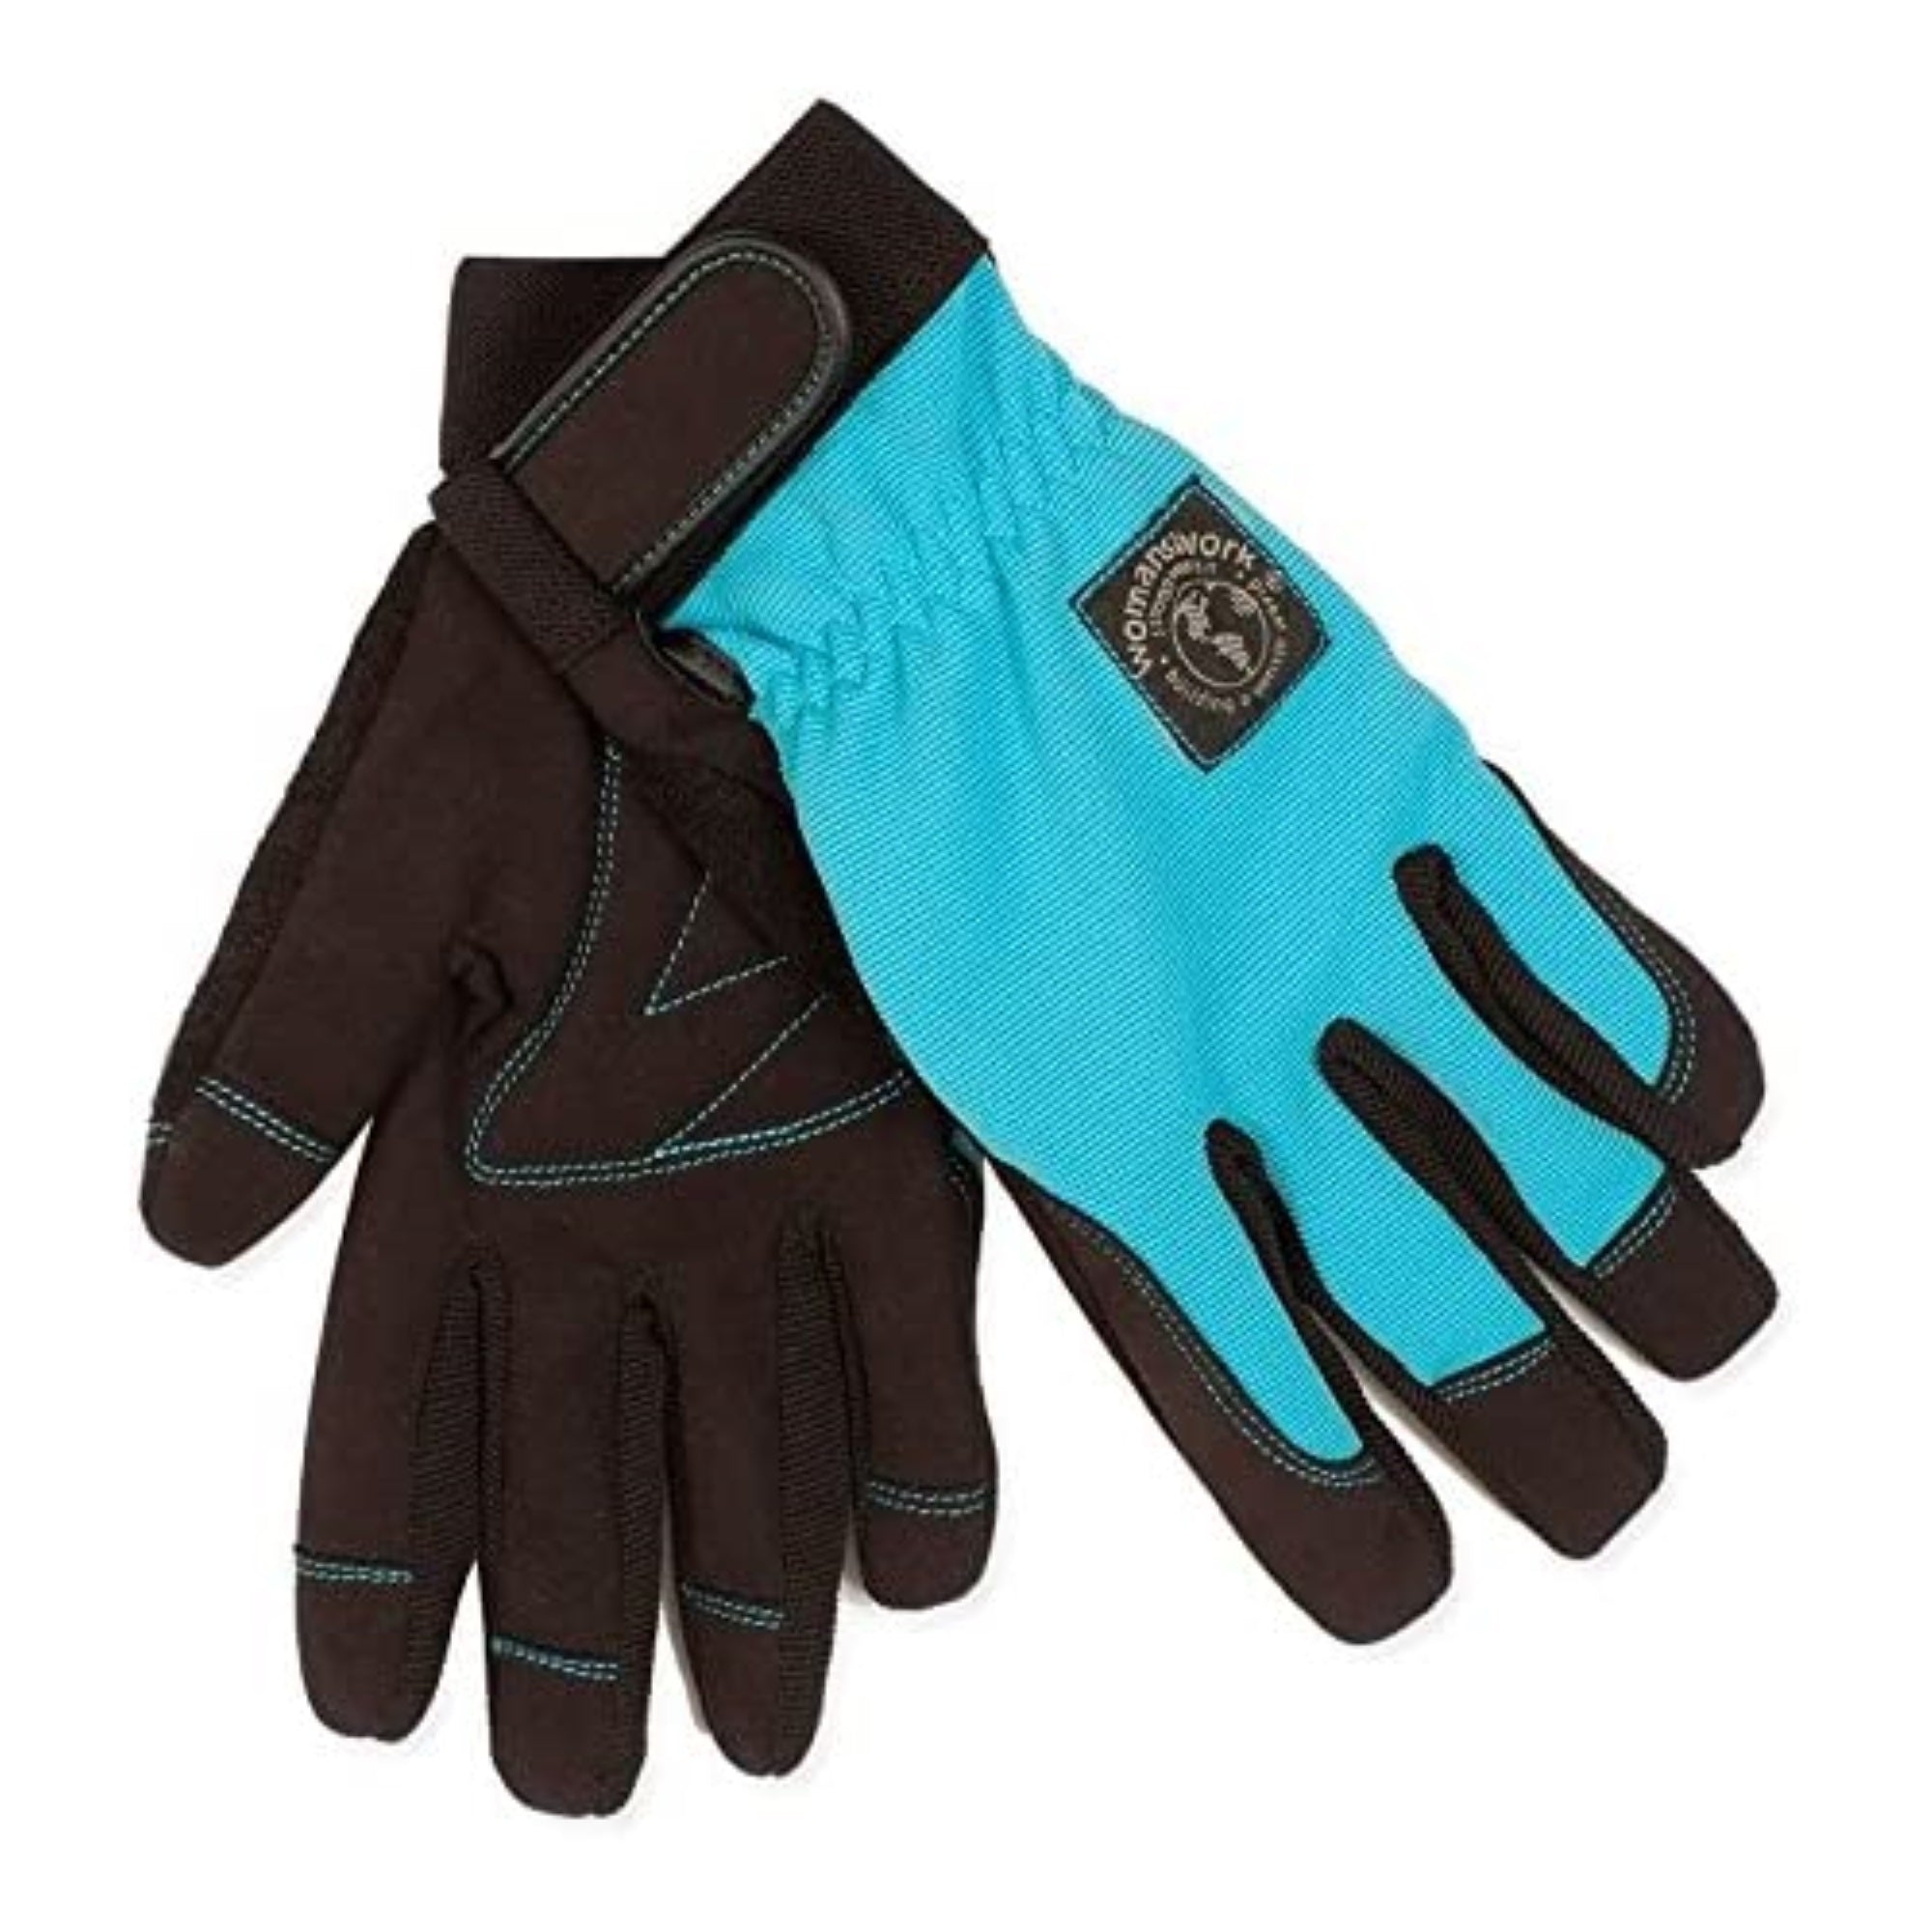 Womanswork Digger Gardening Glove with Micro Suede Palm, Teal, Medium